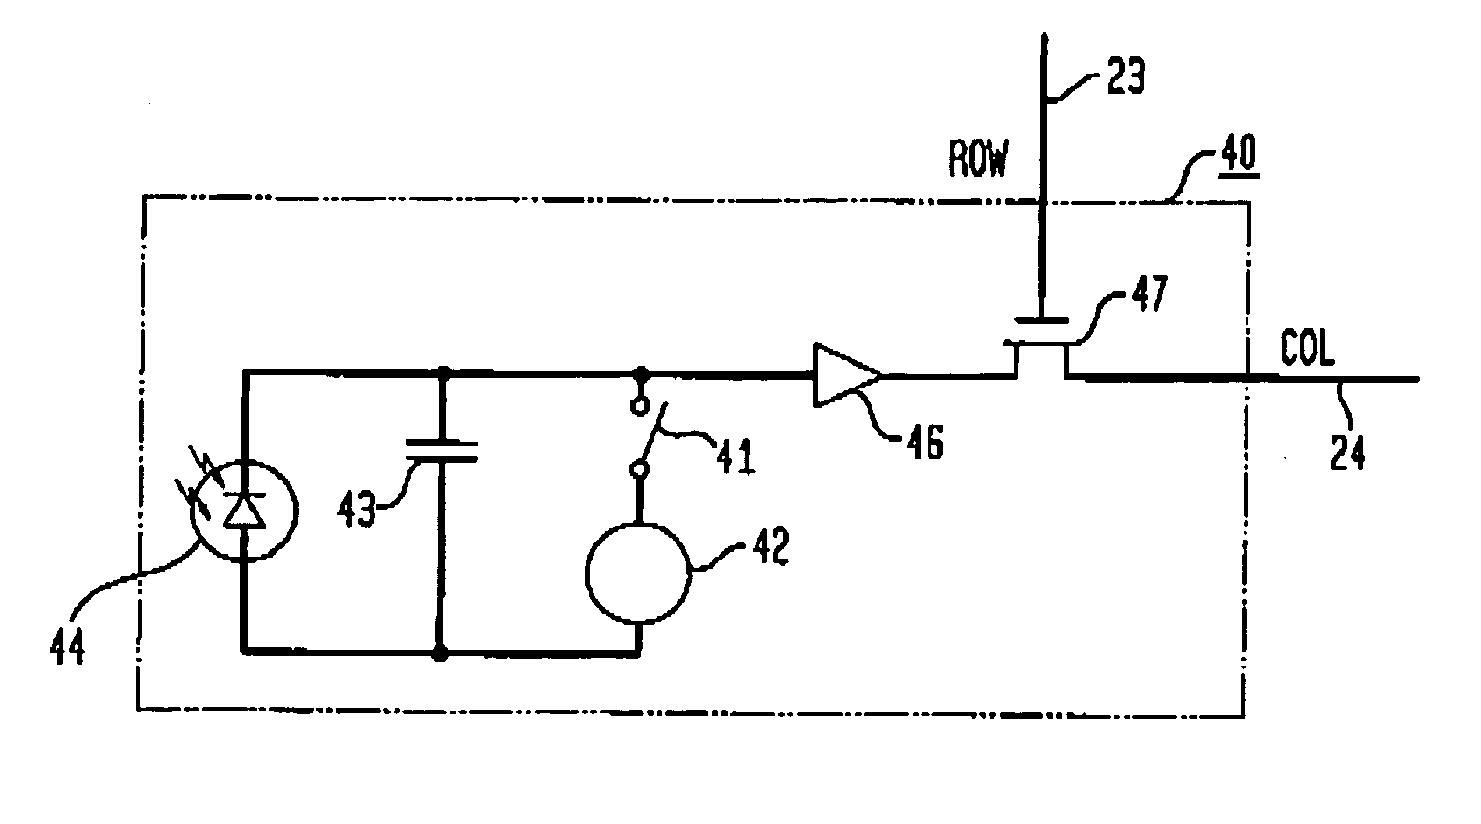 Optical receiver comprising a receiver photodetector integrated with an imaging array